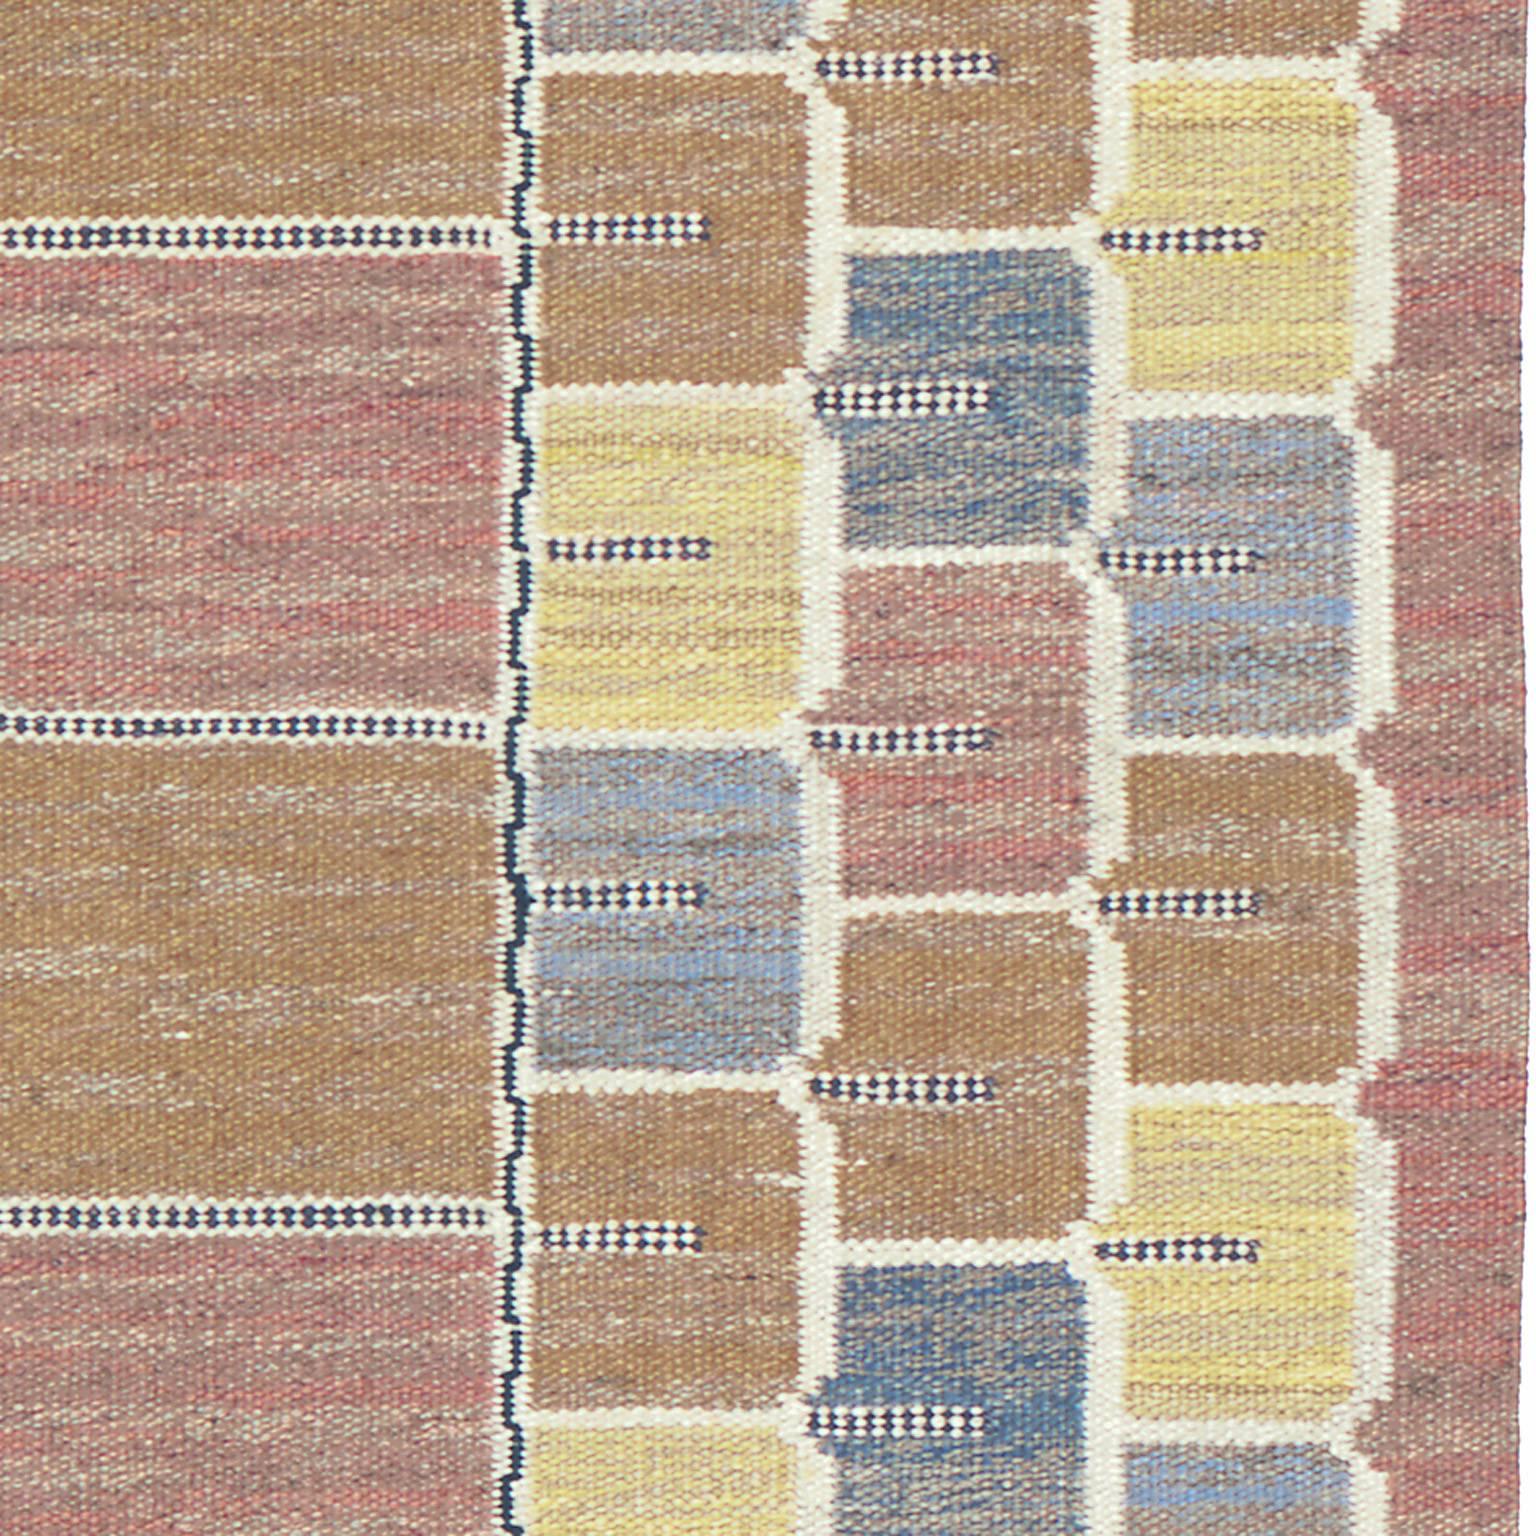 Wool Mid-20th Century Swedish Flat-Weave Carpet by AB Märta Måås-Fjetterström For Sale